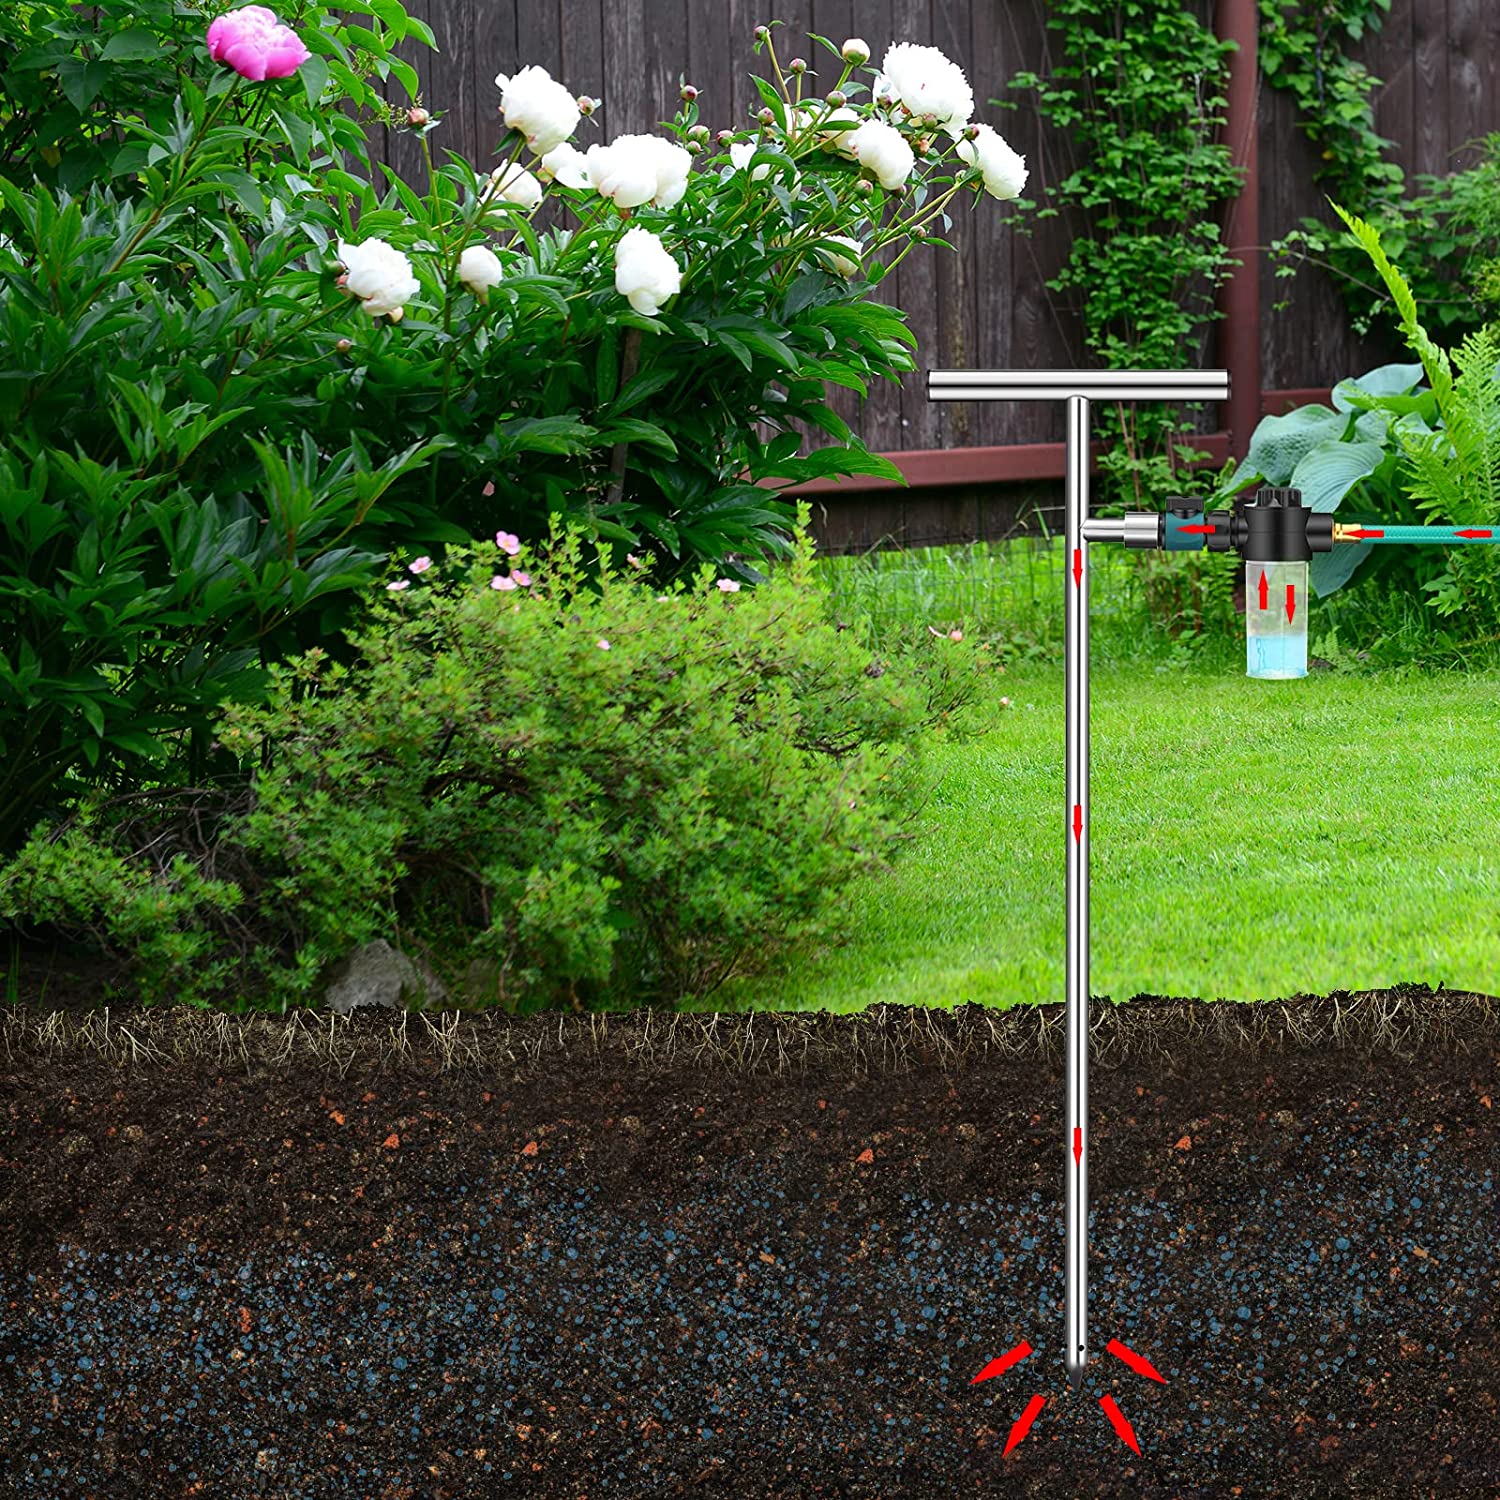 Root Feeder Deep Root Watering Tool with Fertilizer Dispenser Tree Watering Spike Watering Wand Irrigation System,for Plants Trees Bushes Shrubs Made of Stainless Steel with Shut Off Valve T Handle